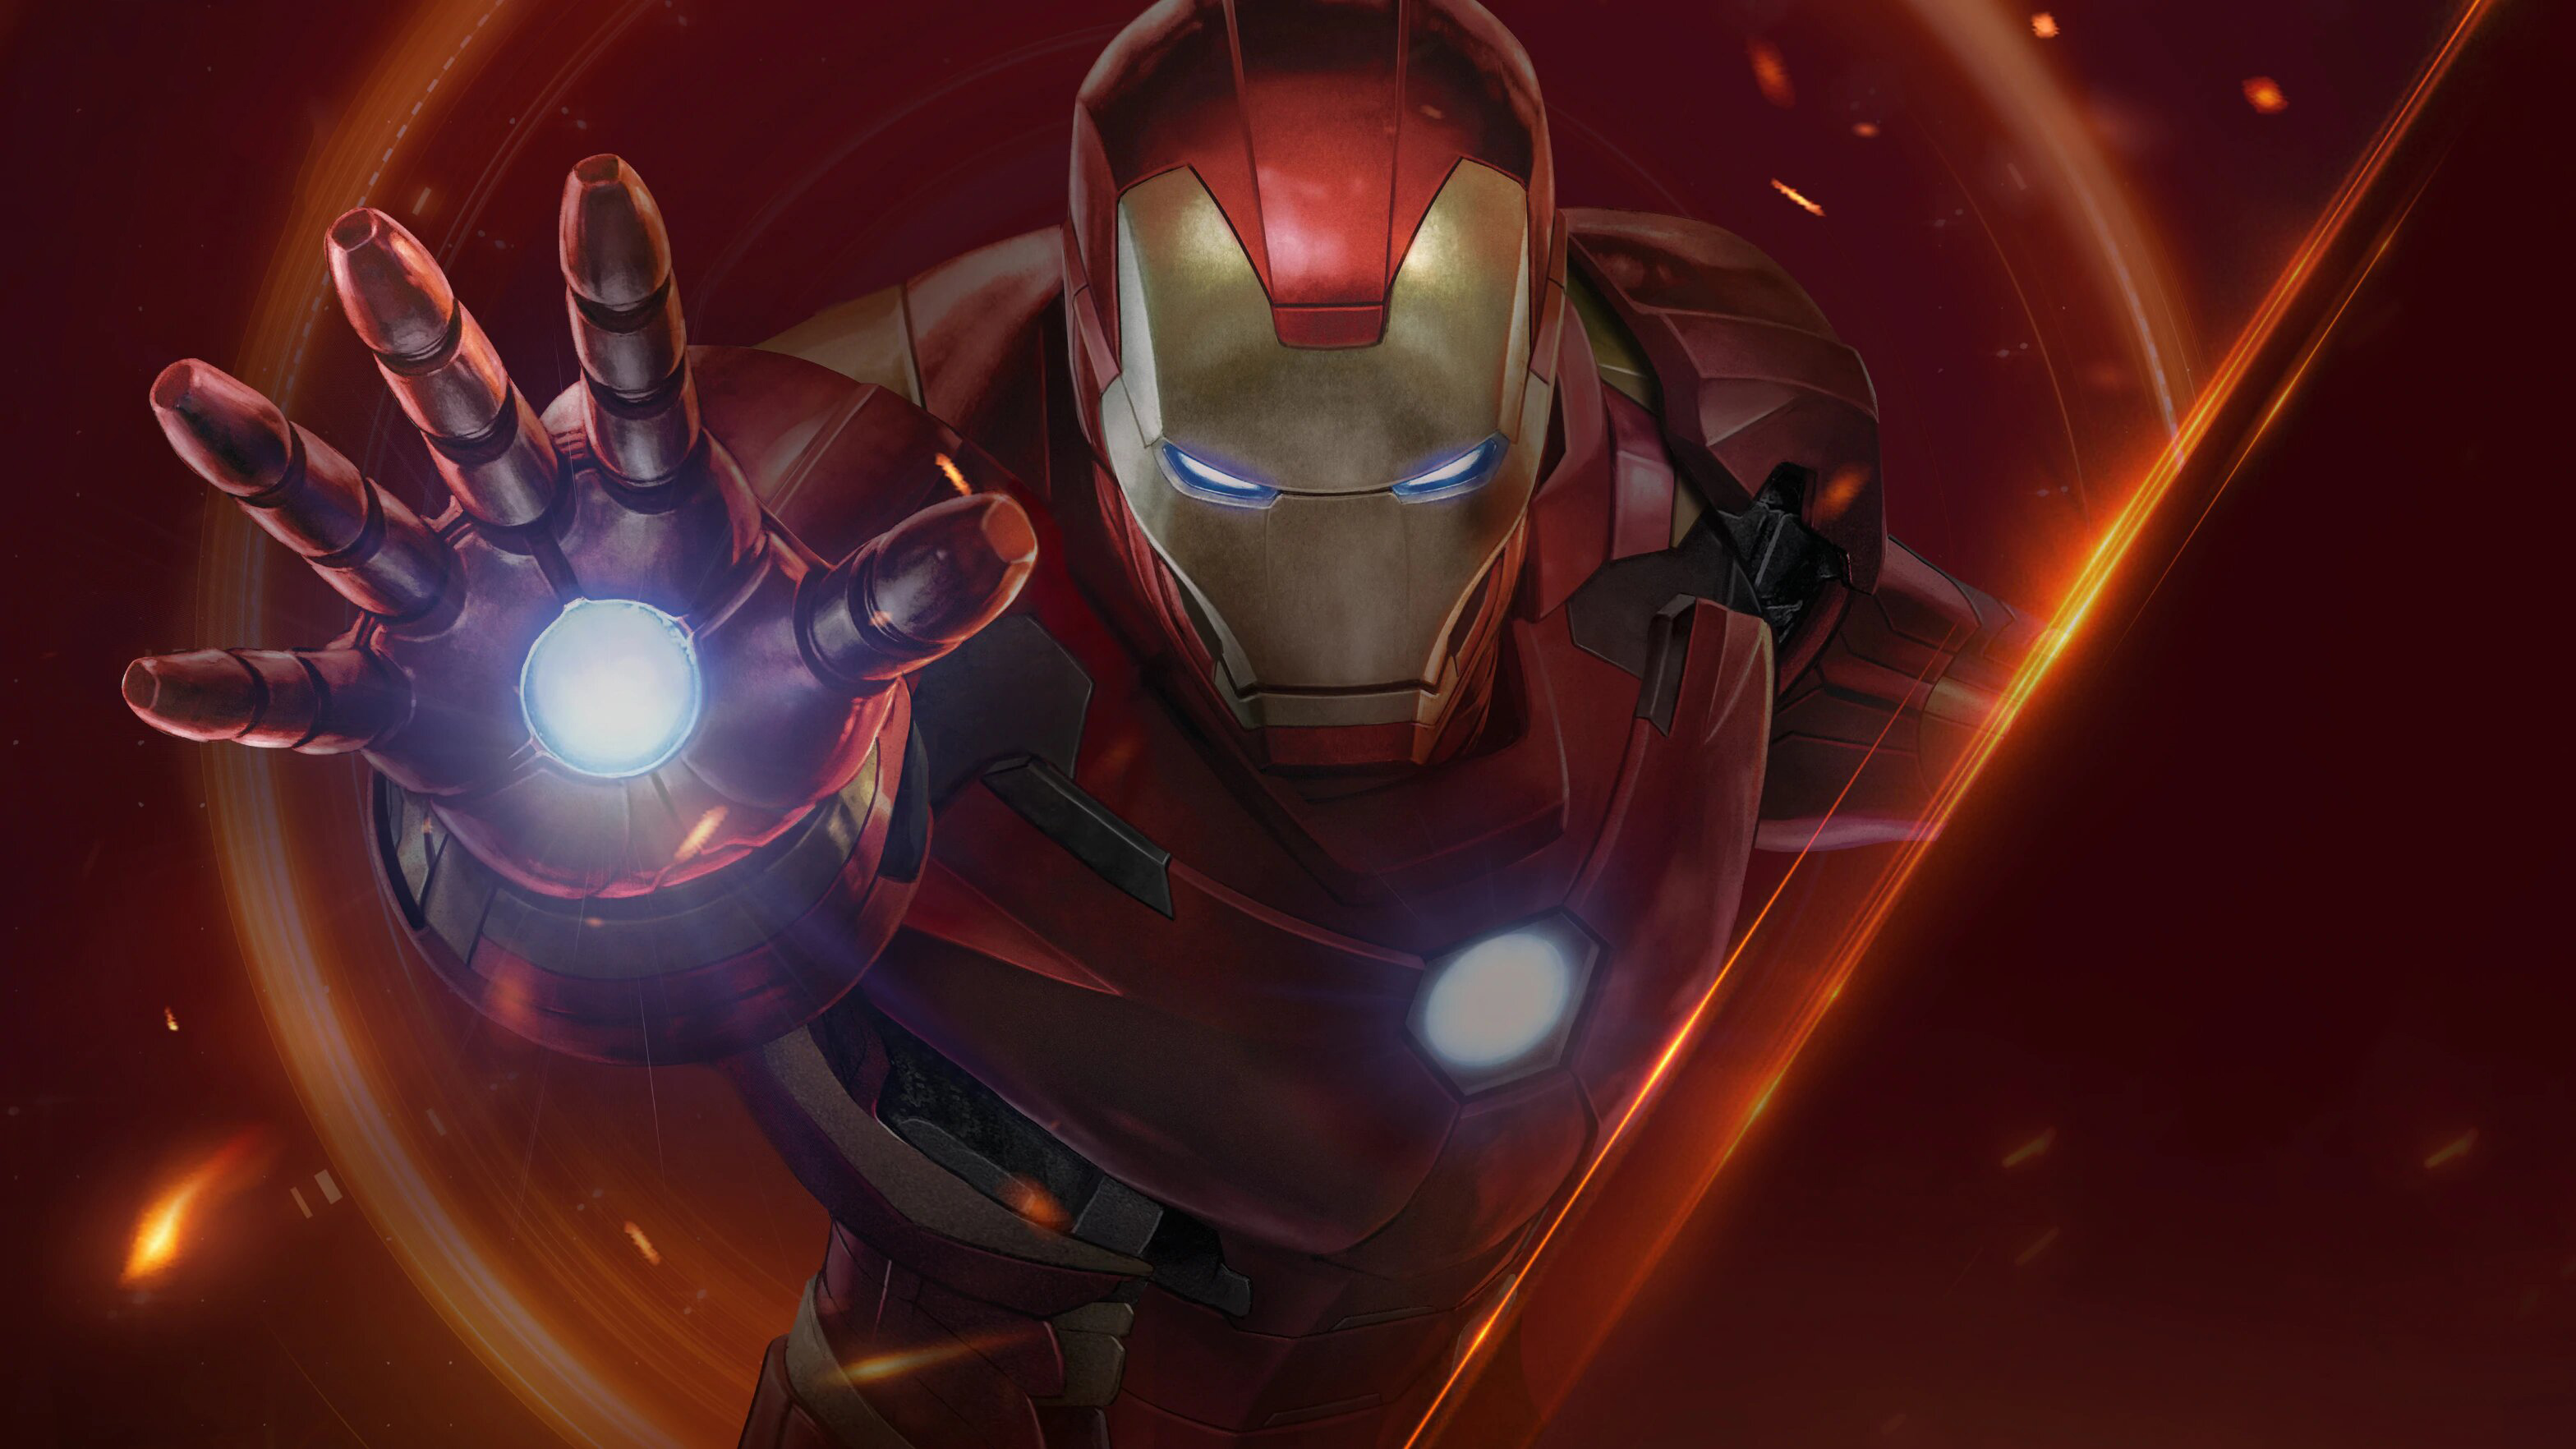 In Iron Man Wallpapers You Will Find An Excellent Collection - Background Iron Man - HD Wallpaper 